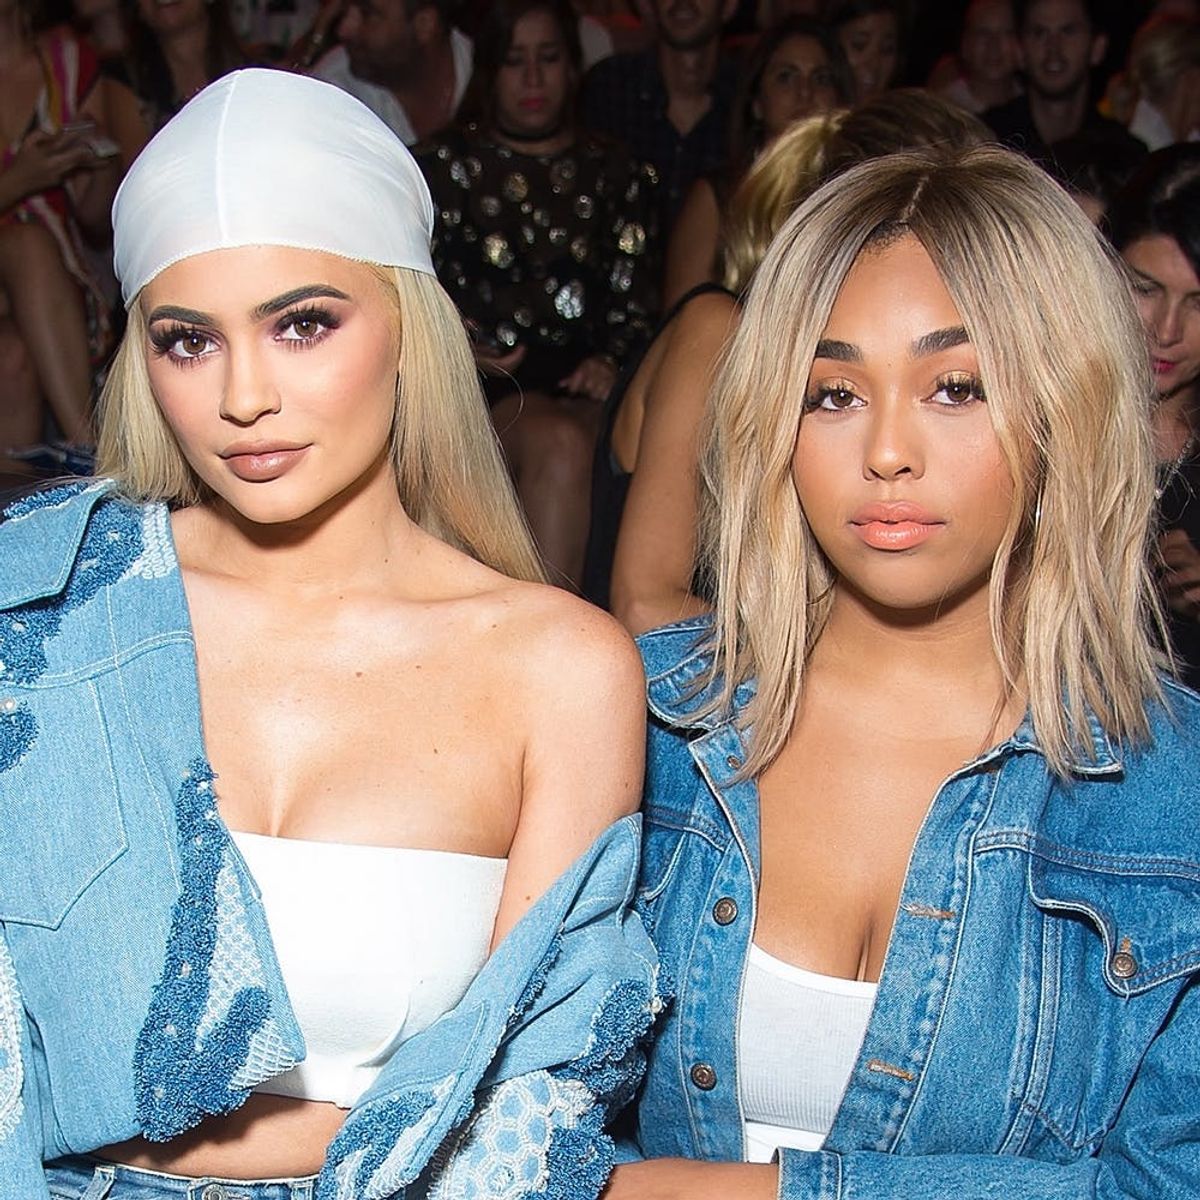 Kylie Jenner Surprised BFF Jordyn Woods With a Hot-Air Balloon and a Car for Her Birthday